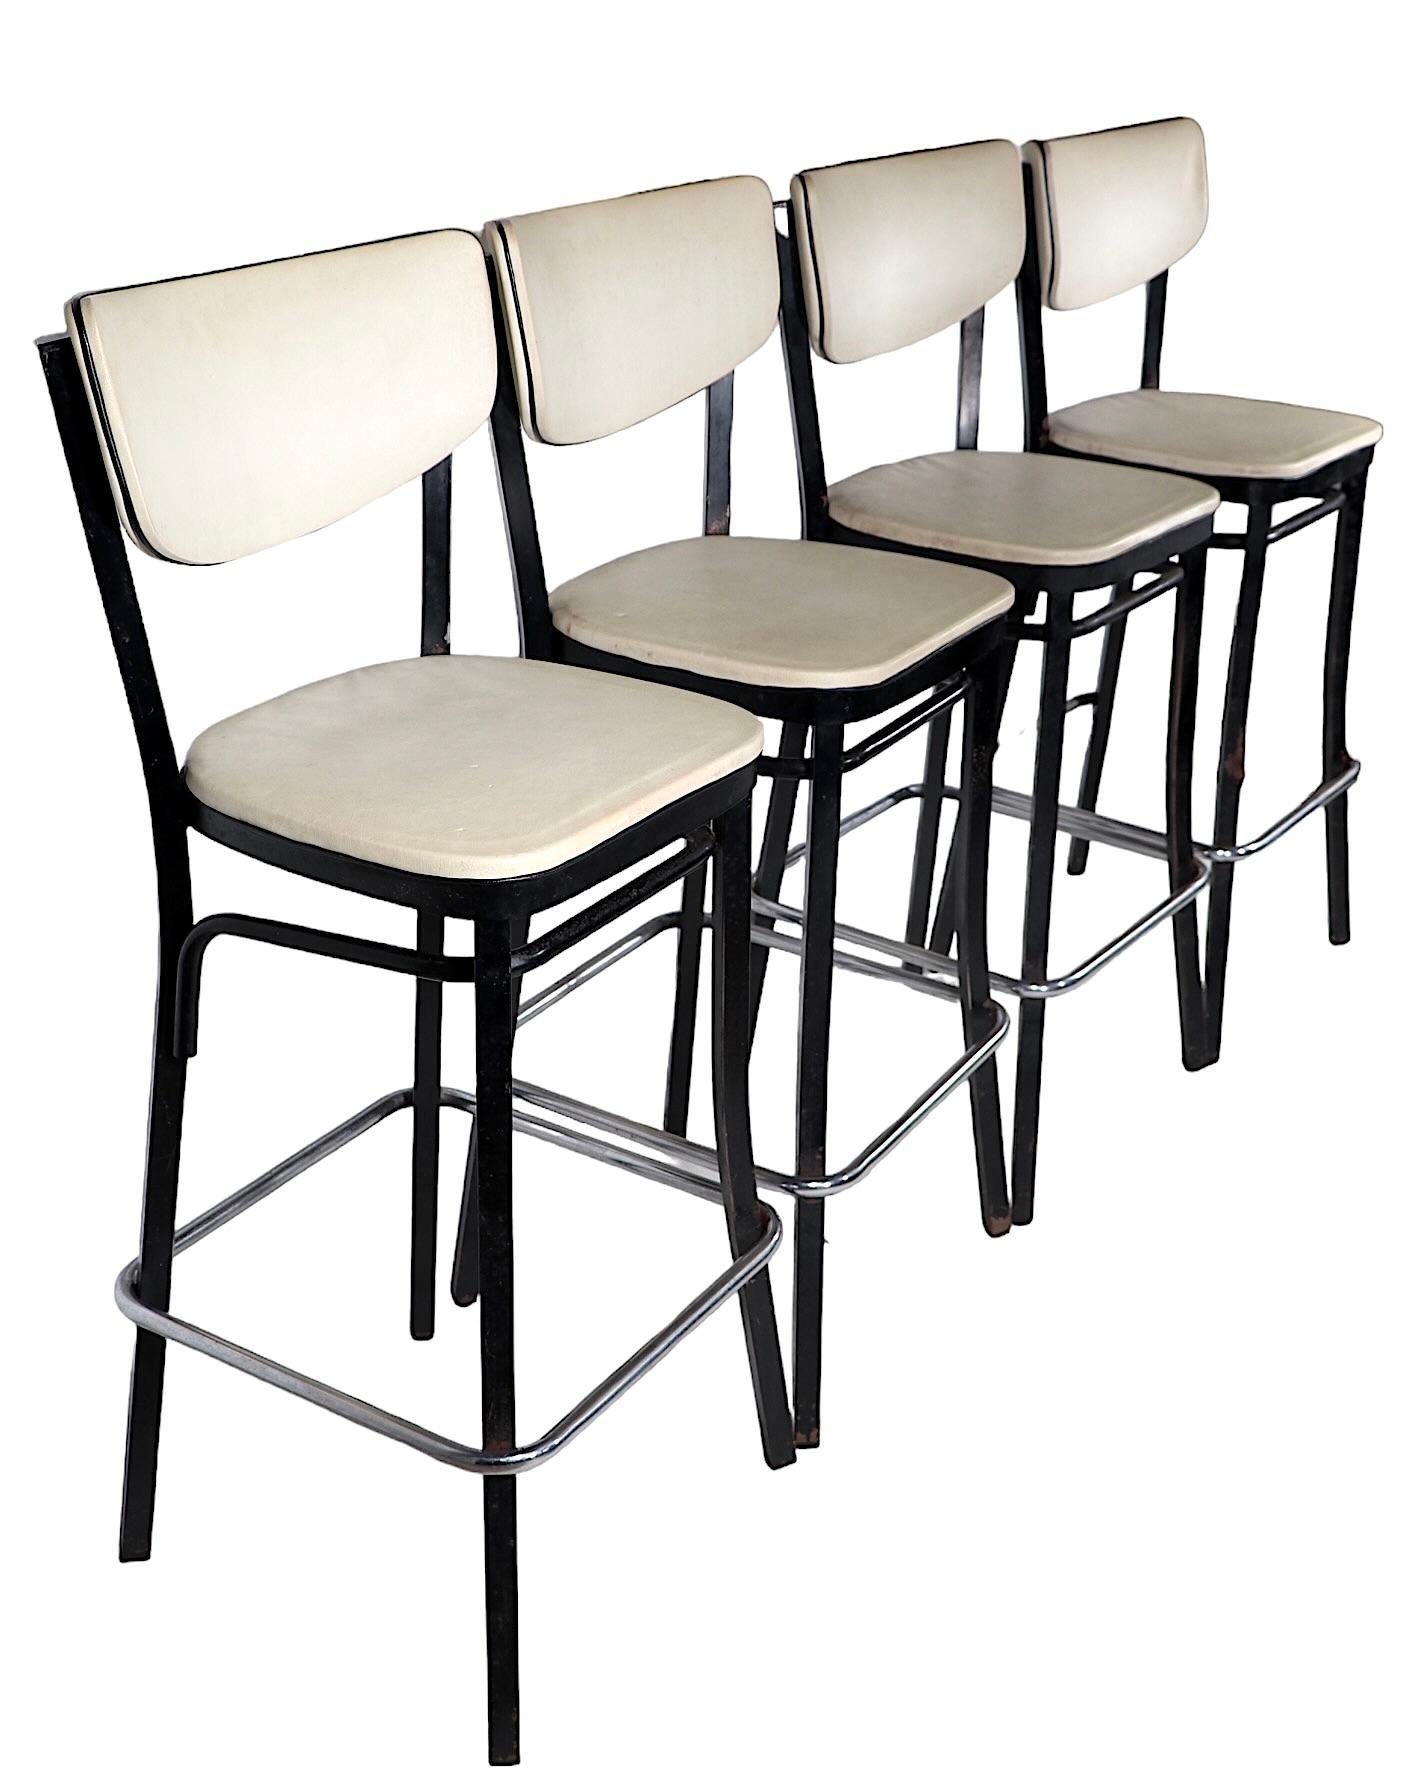 Set of Four Mid Century Bar Stools by Finer Chrome Products Co. Inc. c 1950/1960 For Sale 6